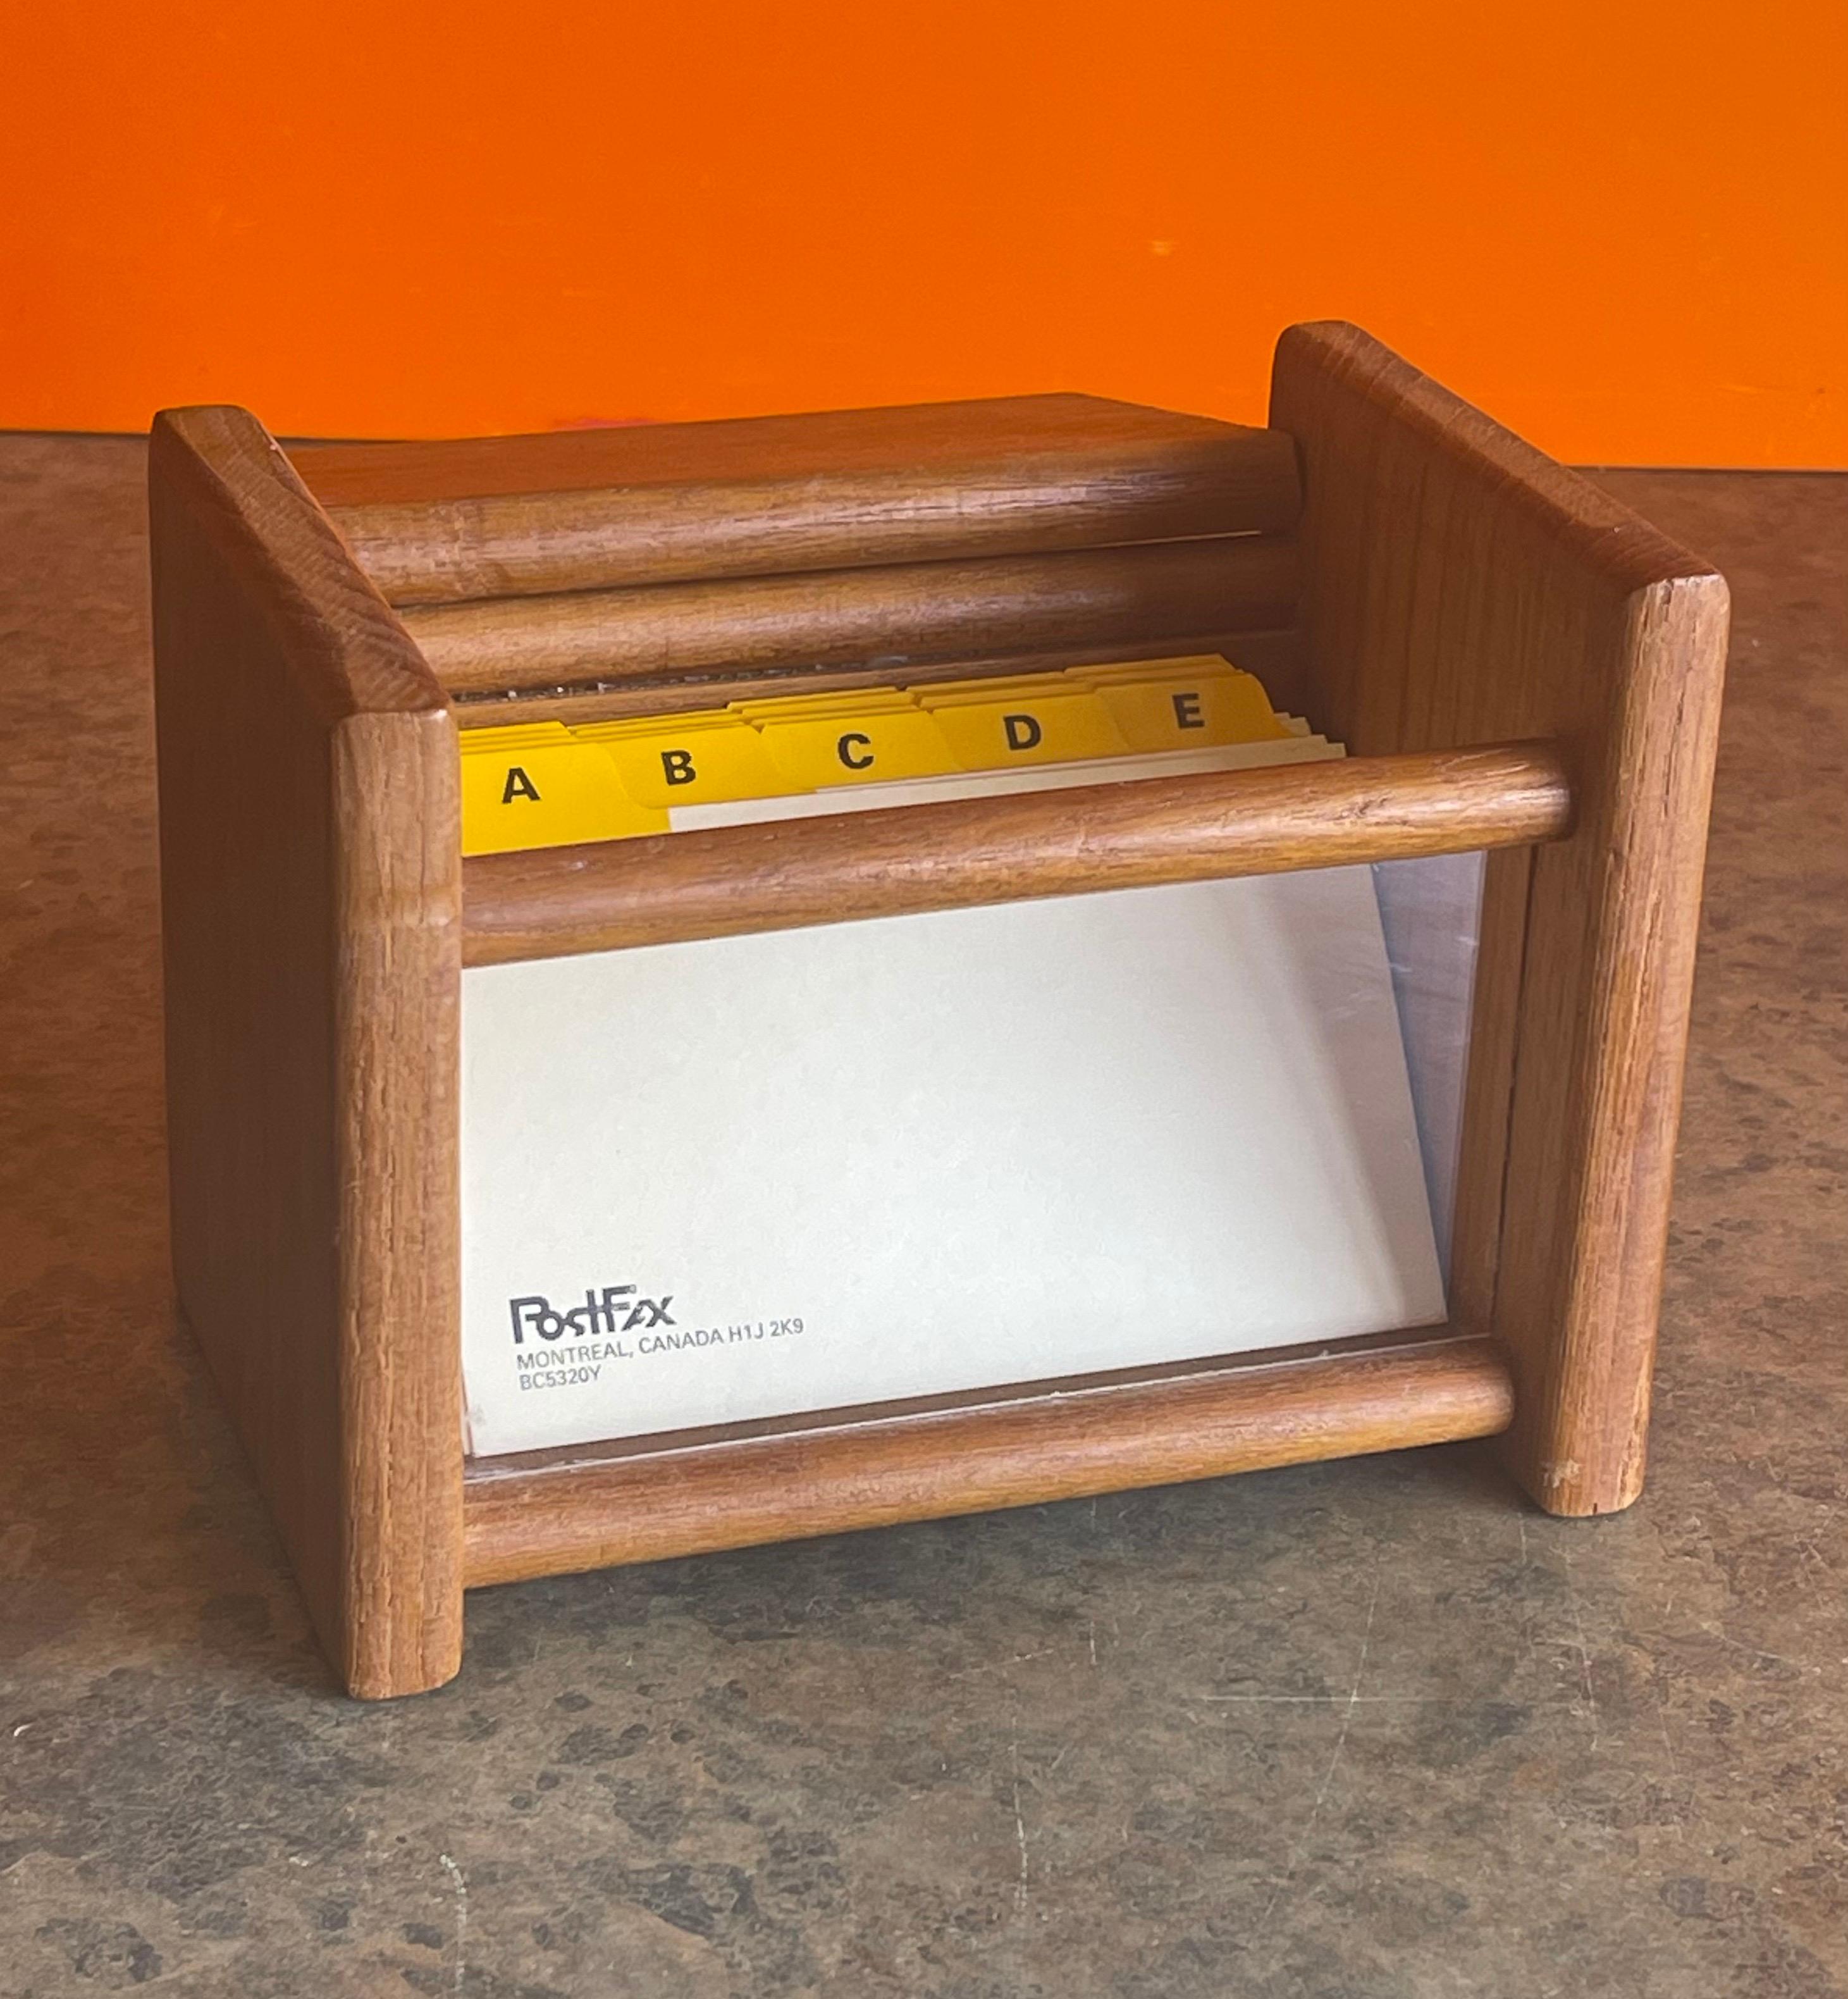 MCM teak index card file box, circa 1970s. The box is in great vintage condition and measures: 5.5